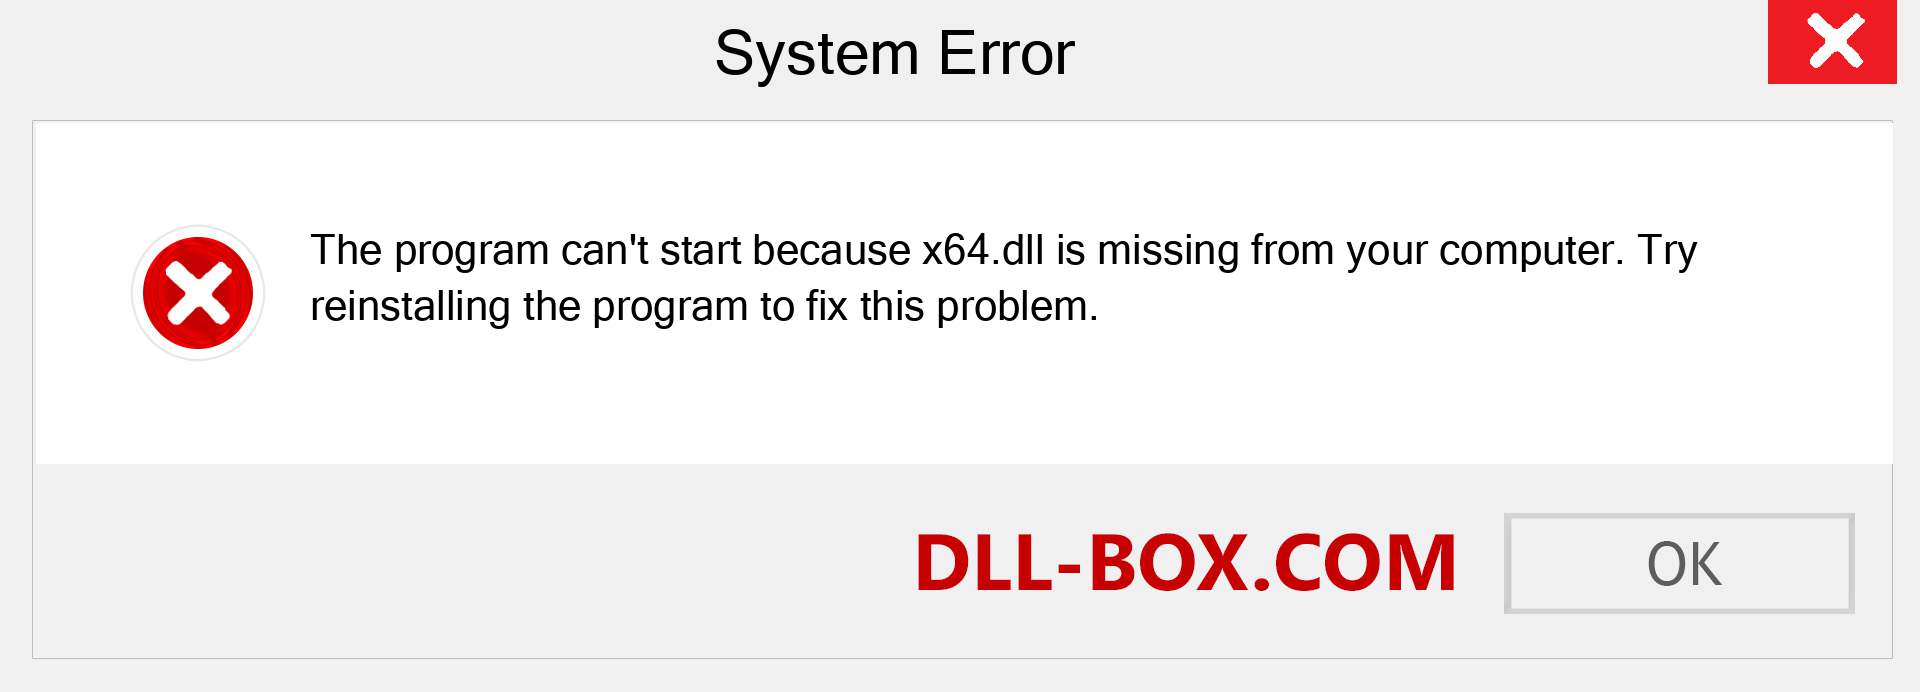  x64.dll file is missing?. Download for Windows 7, 8, 10 - Fix  x64 dll Missing Error on Windows, photos, images